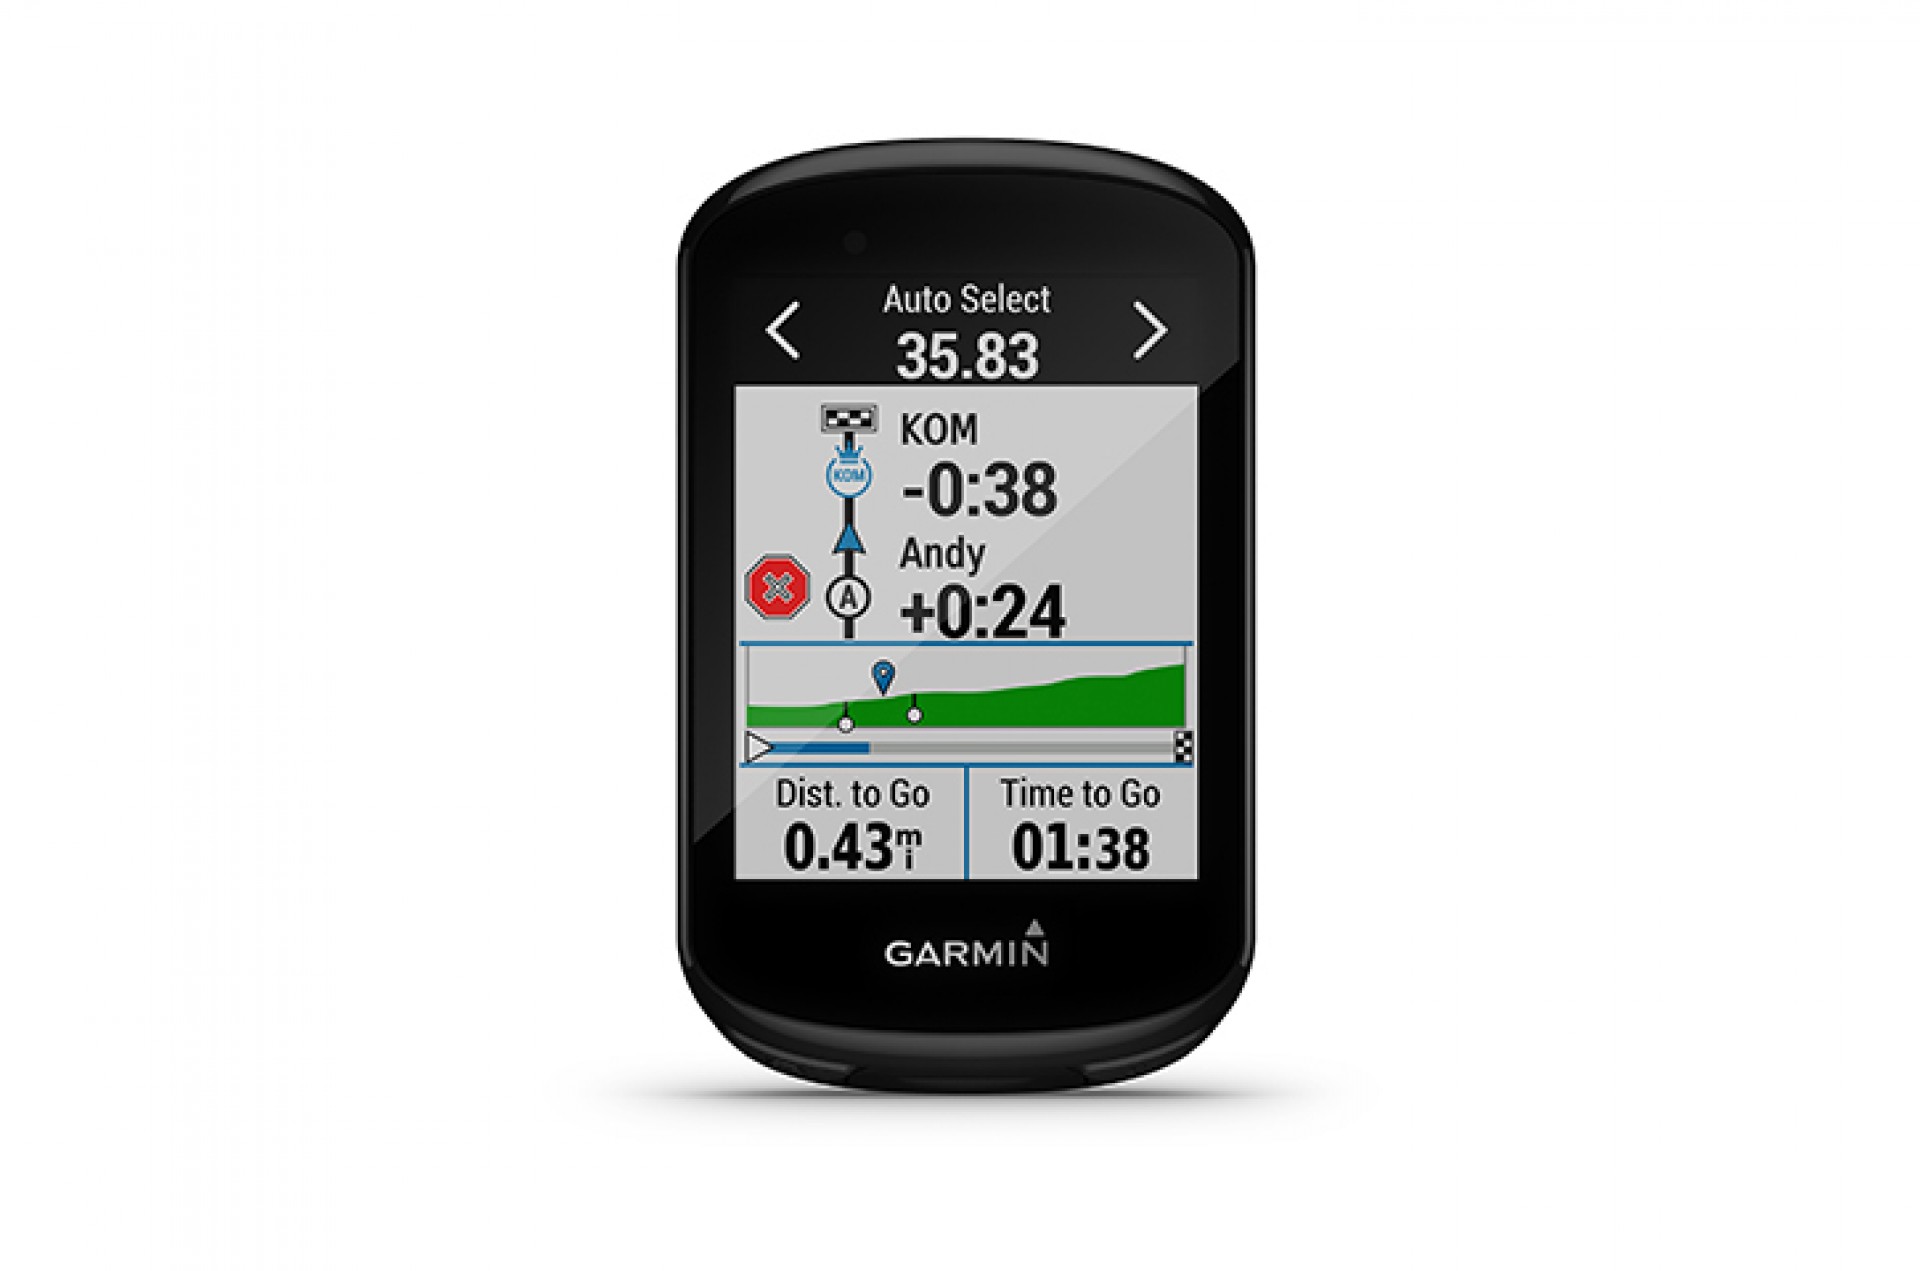 Garmin Edge 530 vs. 830: Which One Should You Buy?